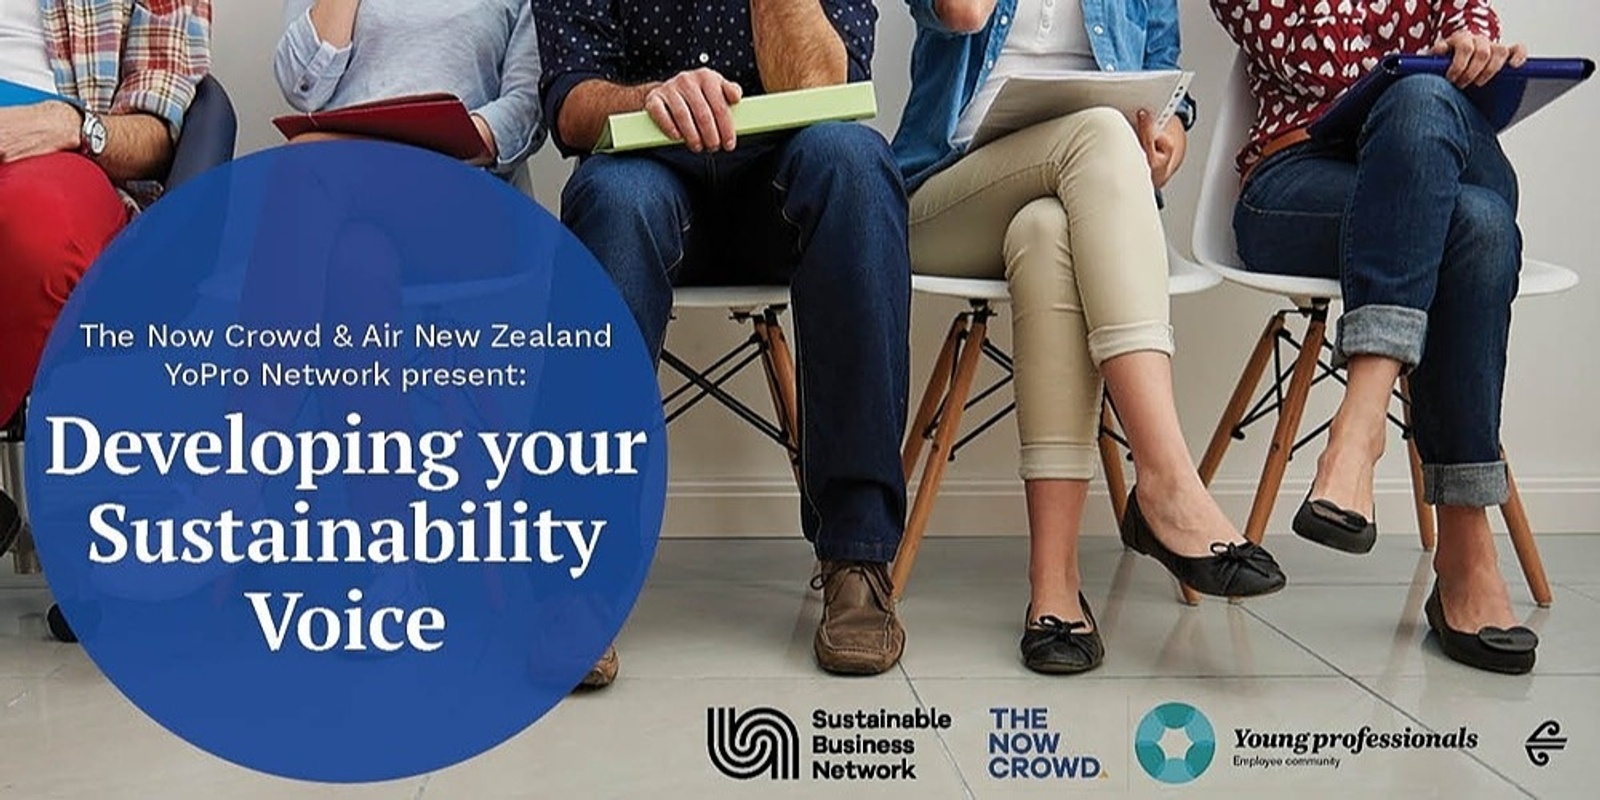 Banner image for The Now Crowd & Air NZ YoPro Network presents: Developing your Sustainability Voice